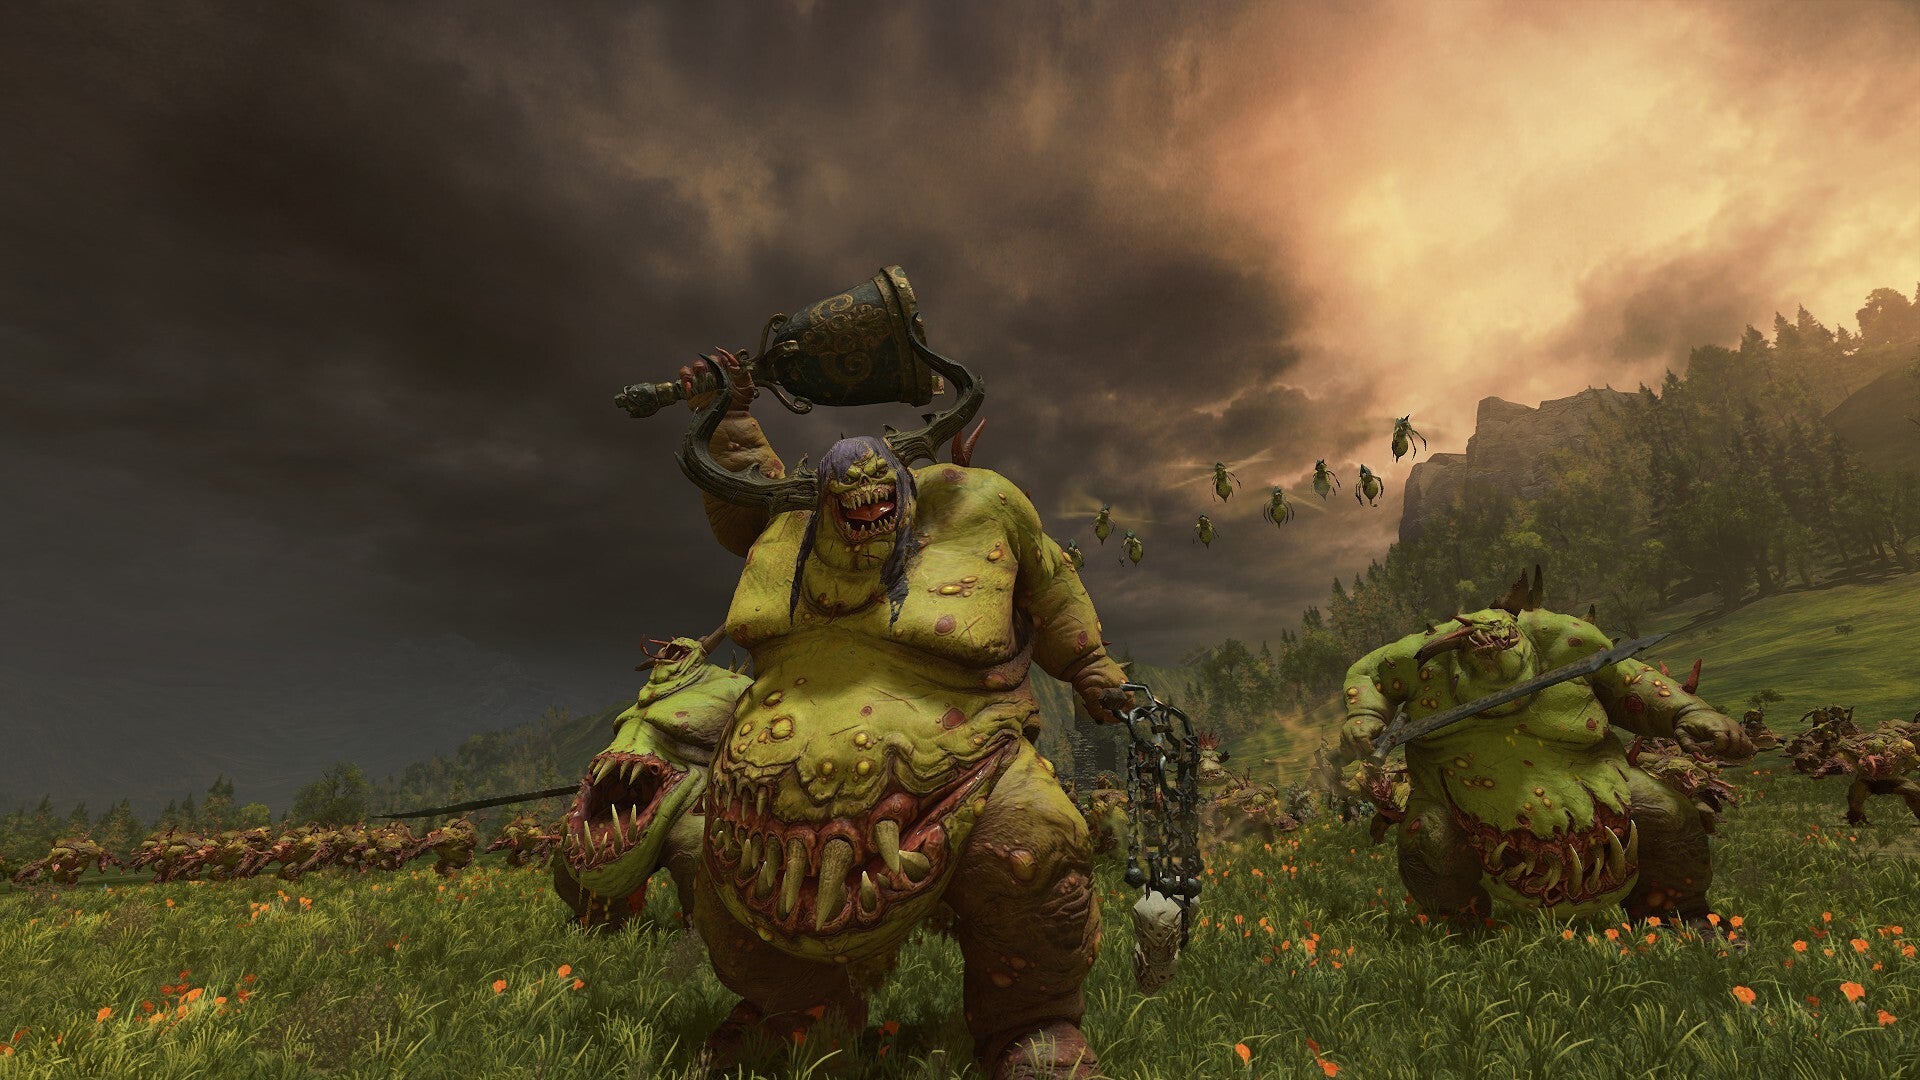 An Exalted Great Unclean One from Total War: Warhammer 3.